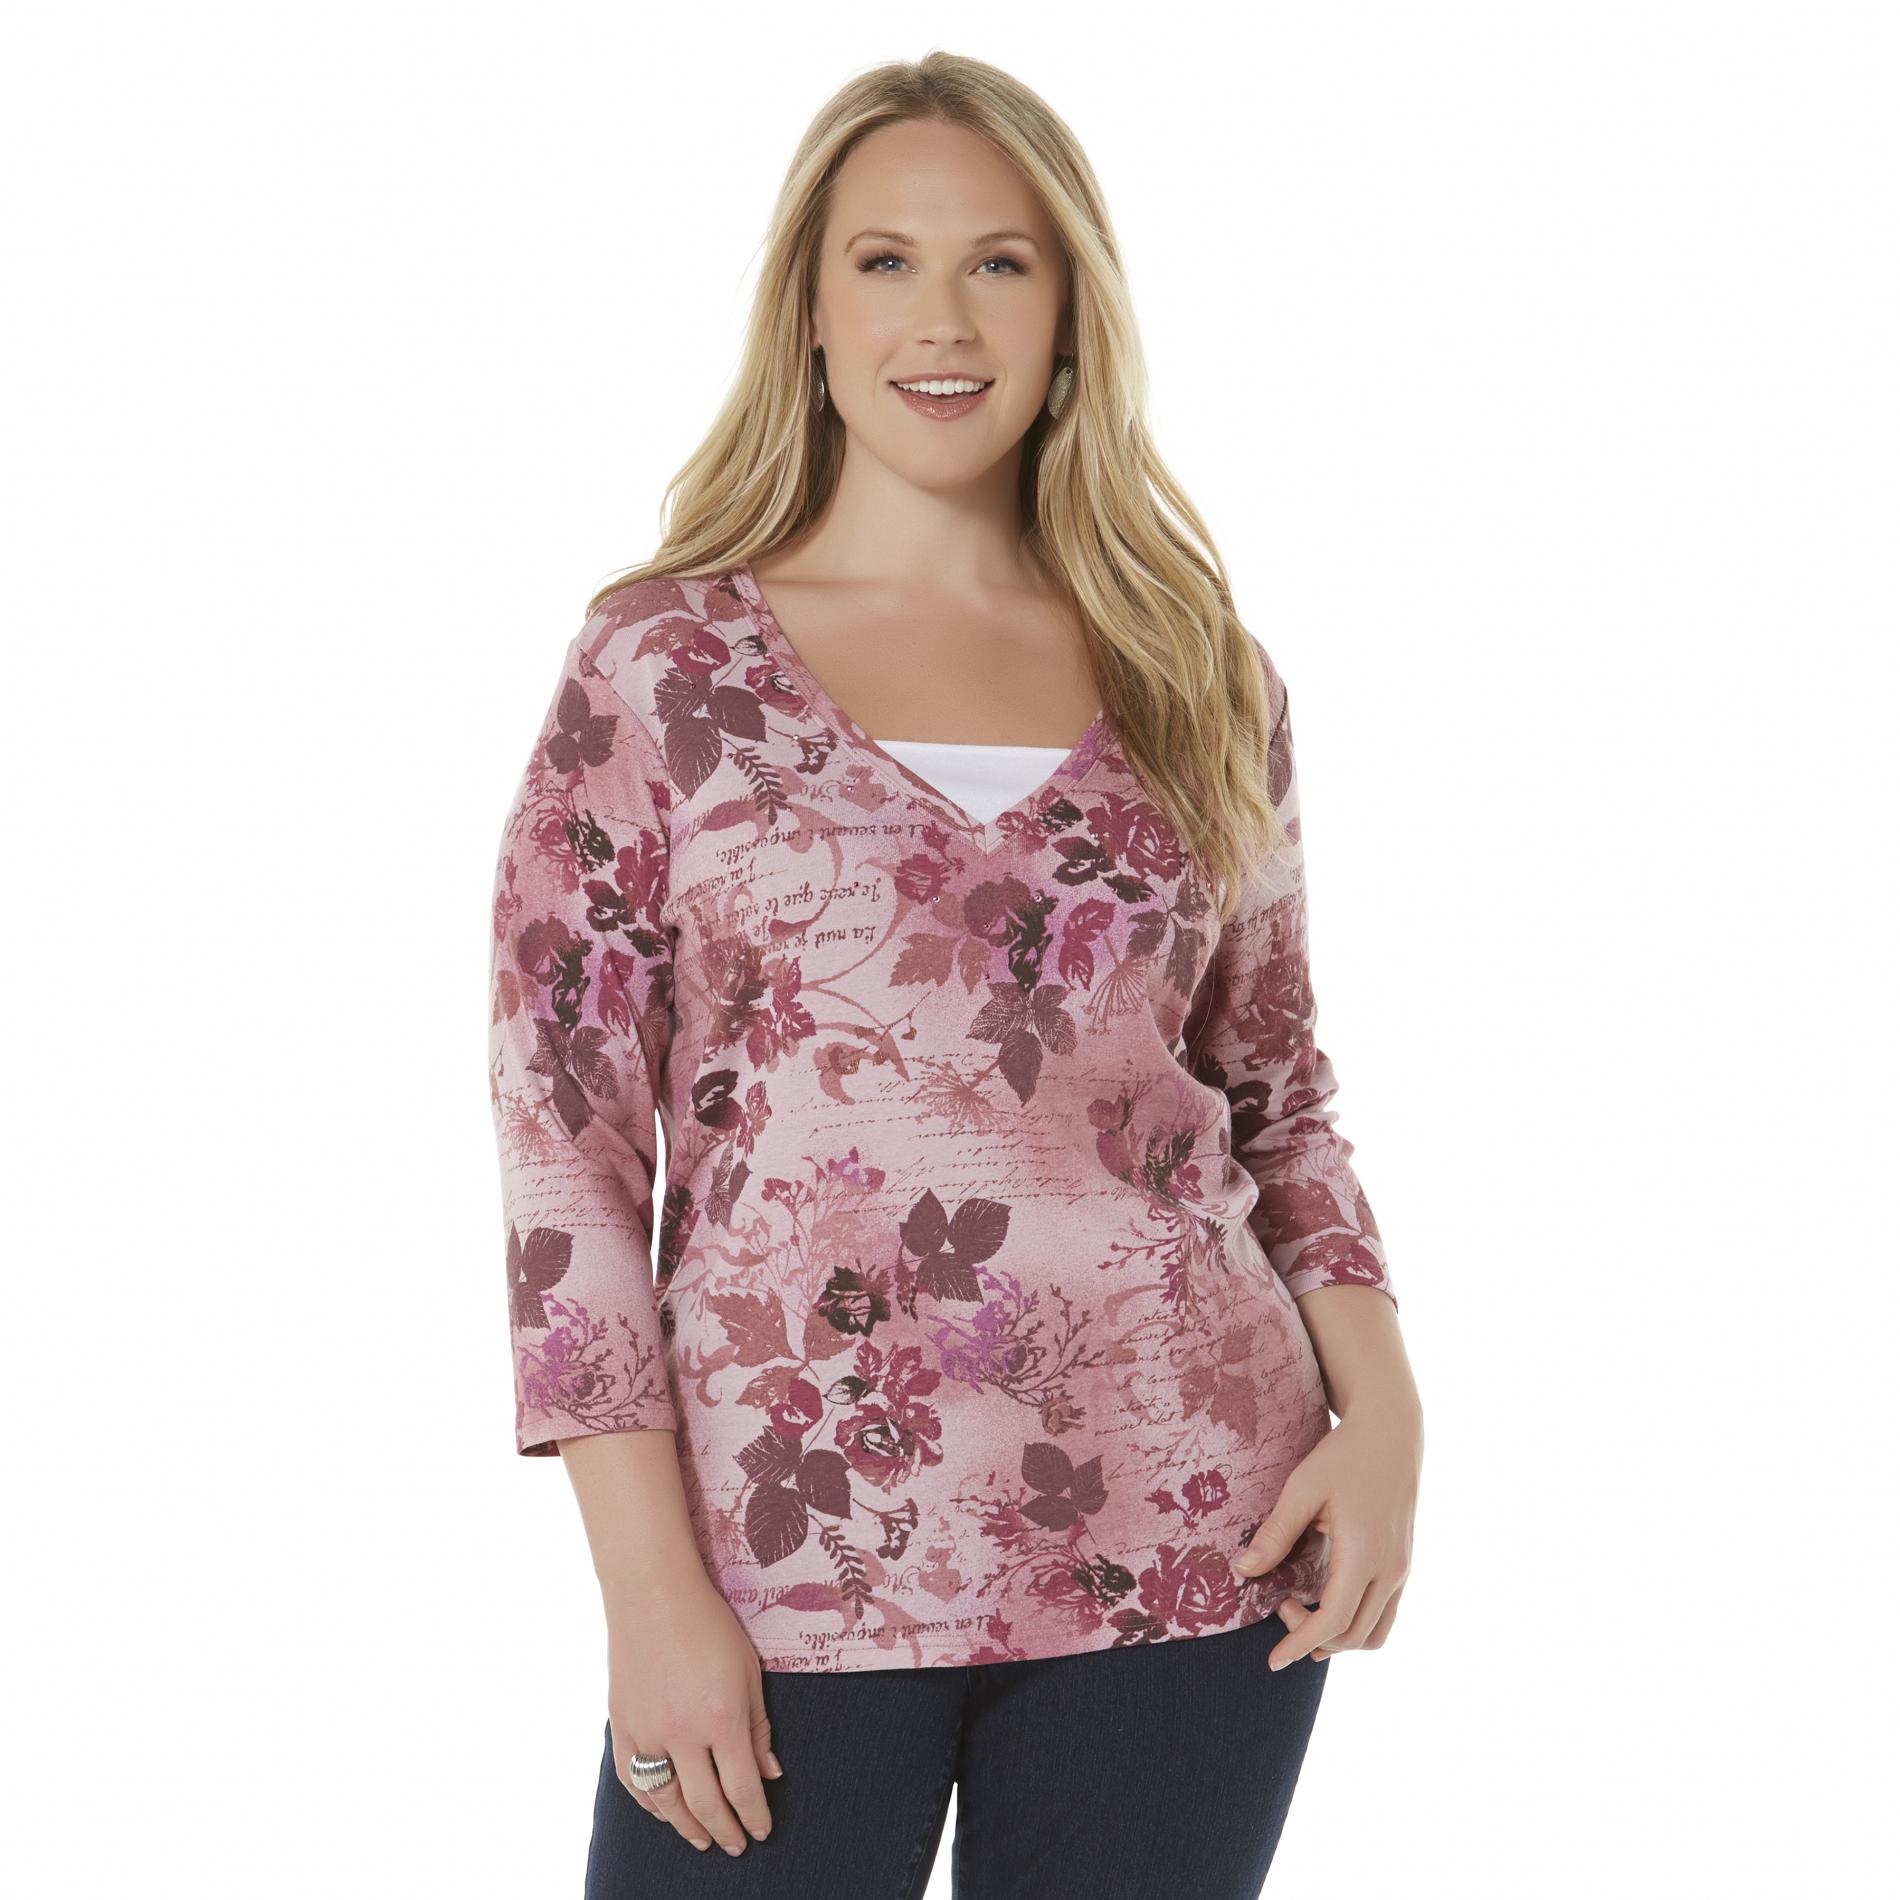 Women's Plus Layered-Look Top - Floral & Calligraphy Print